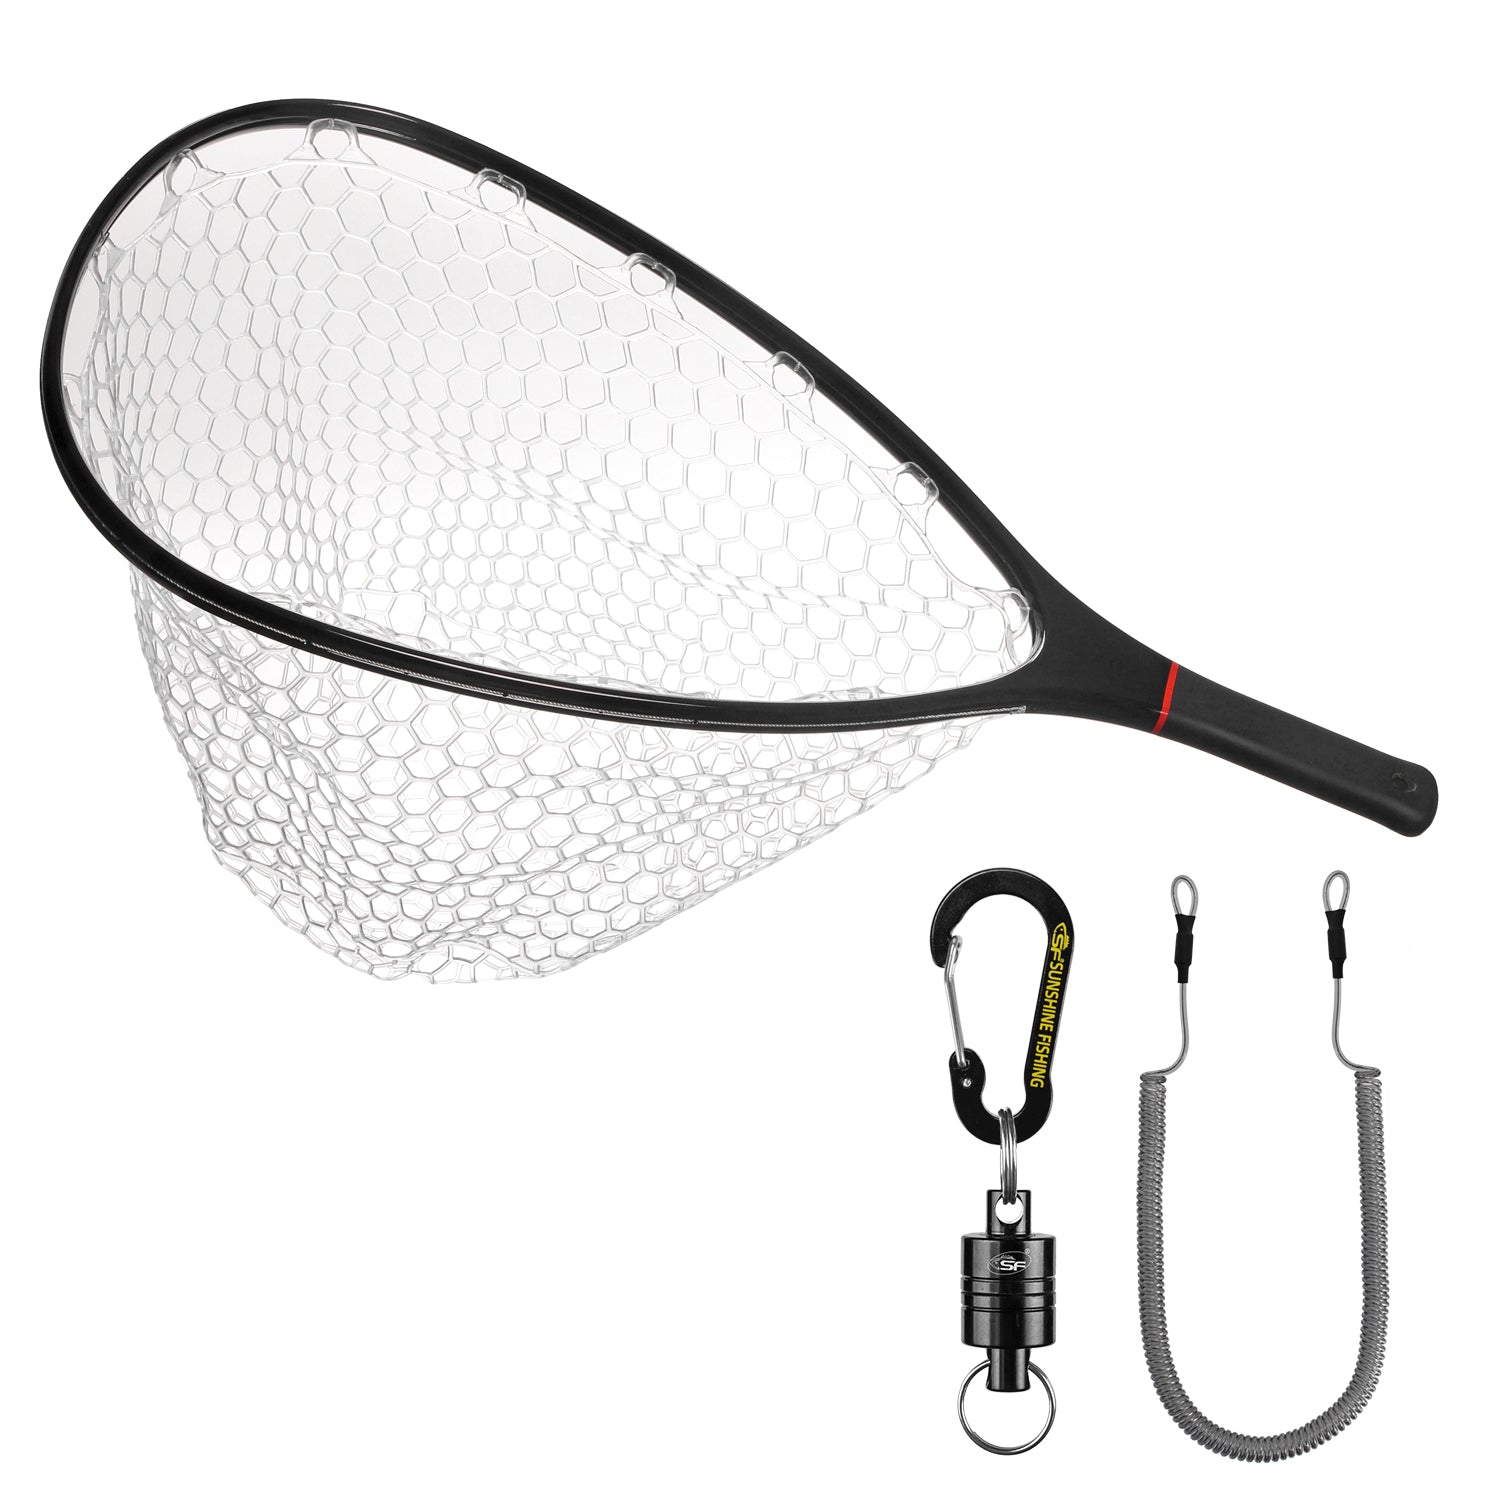 JHFLYCO Carbon Fiber Landing Net With Bungee Cord And, 51% OFF